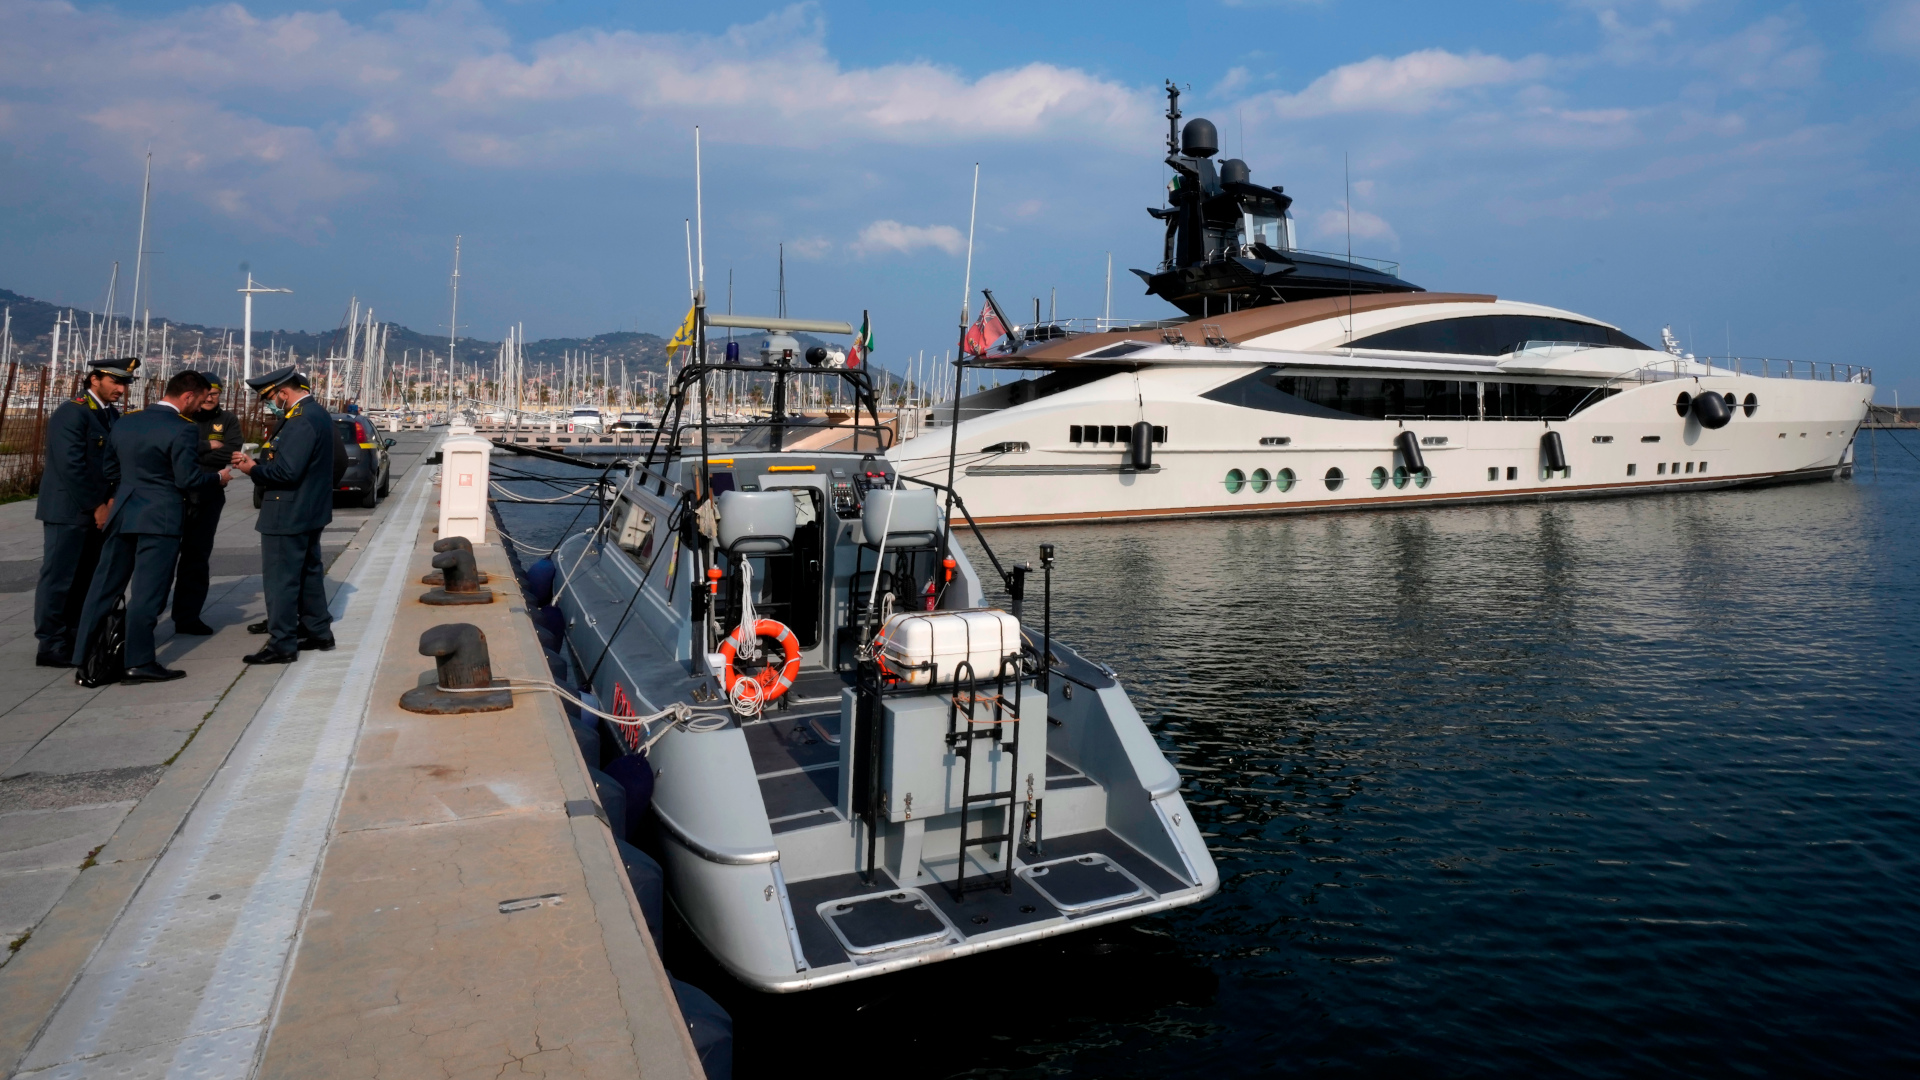 Italian Finance Police worked to seize assets belonging to multiple Russian billionaires, including "Lady M", a yacht owned by Russian oligarch Alexei Mordashov. AP Images